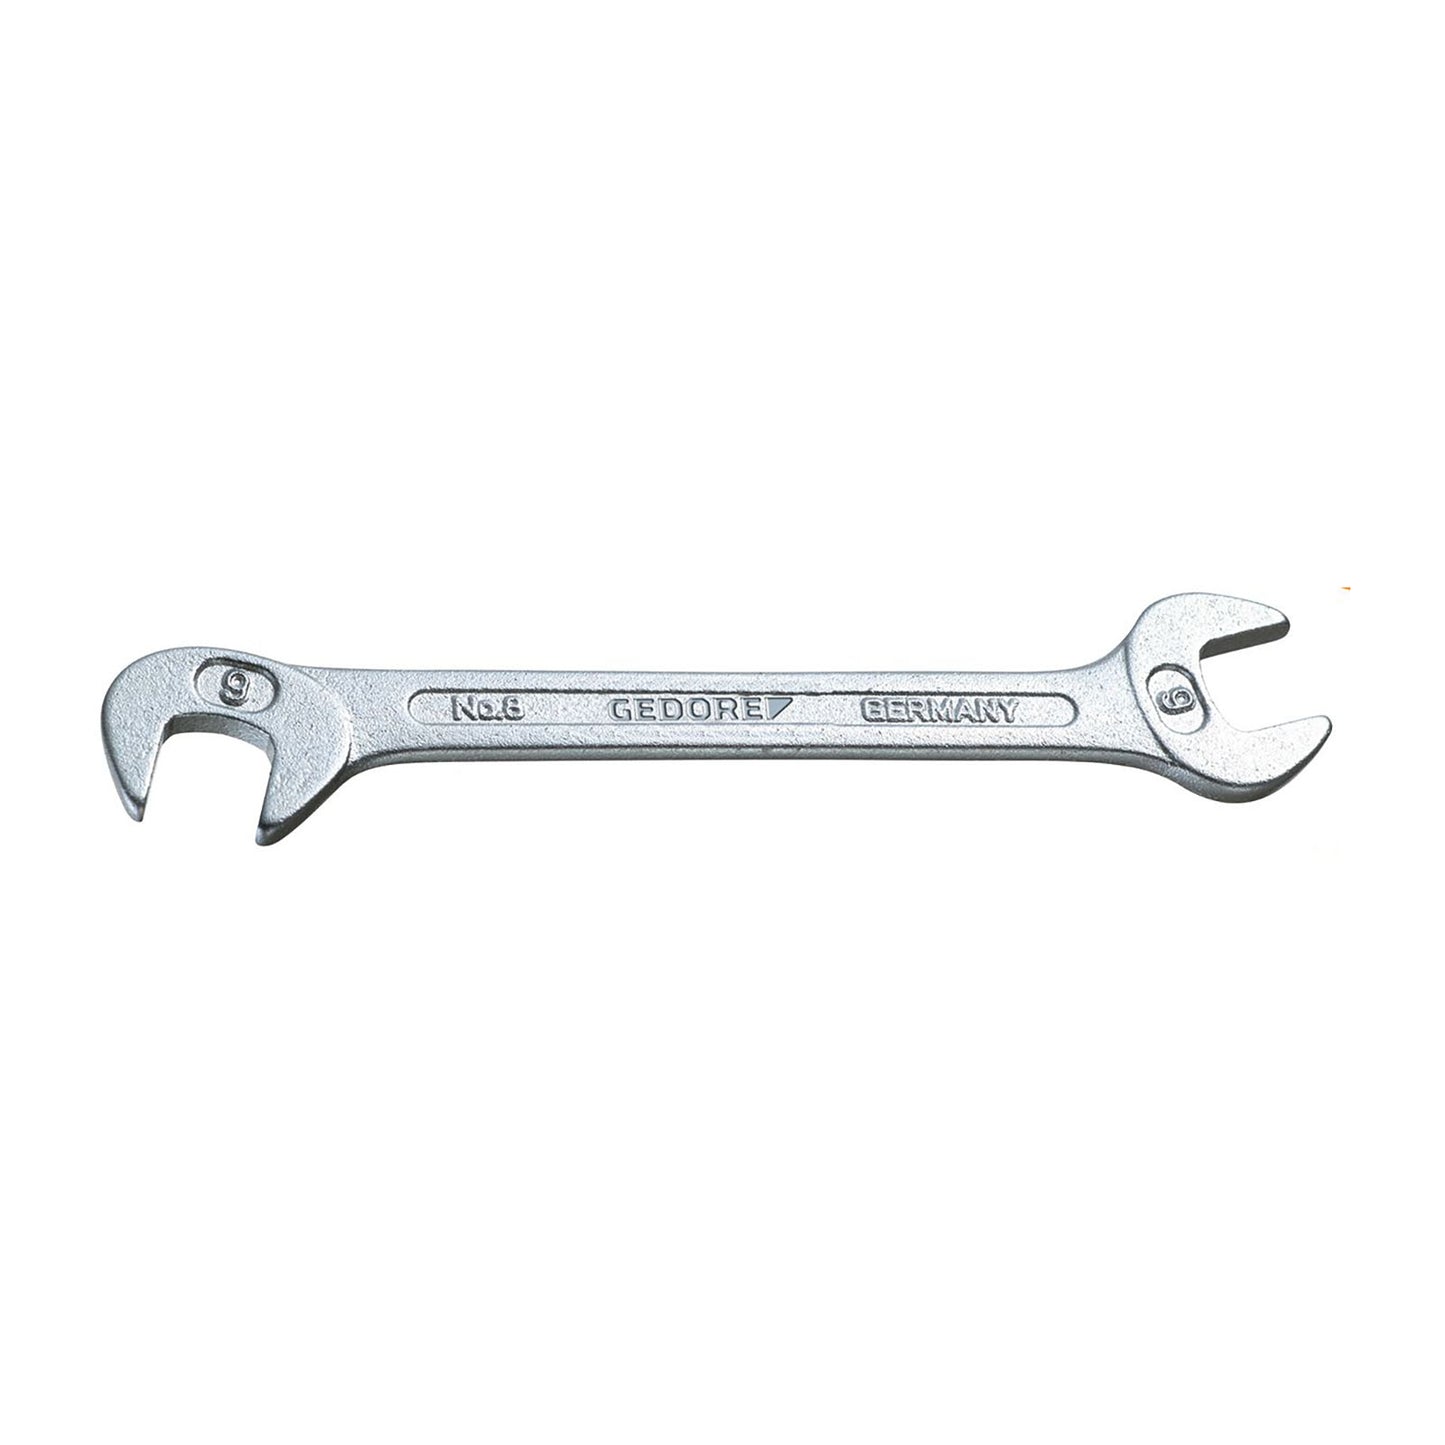 GEDORE 8 6 - Small Fixed Wrench, 6mm (6094390)